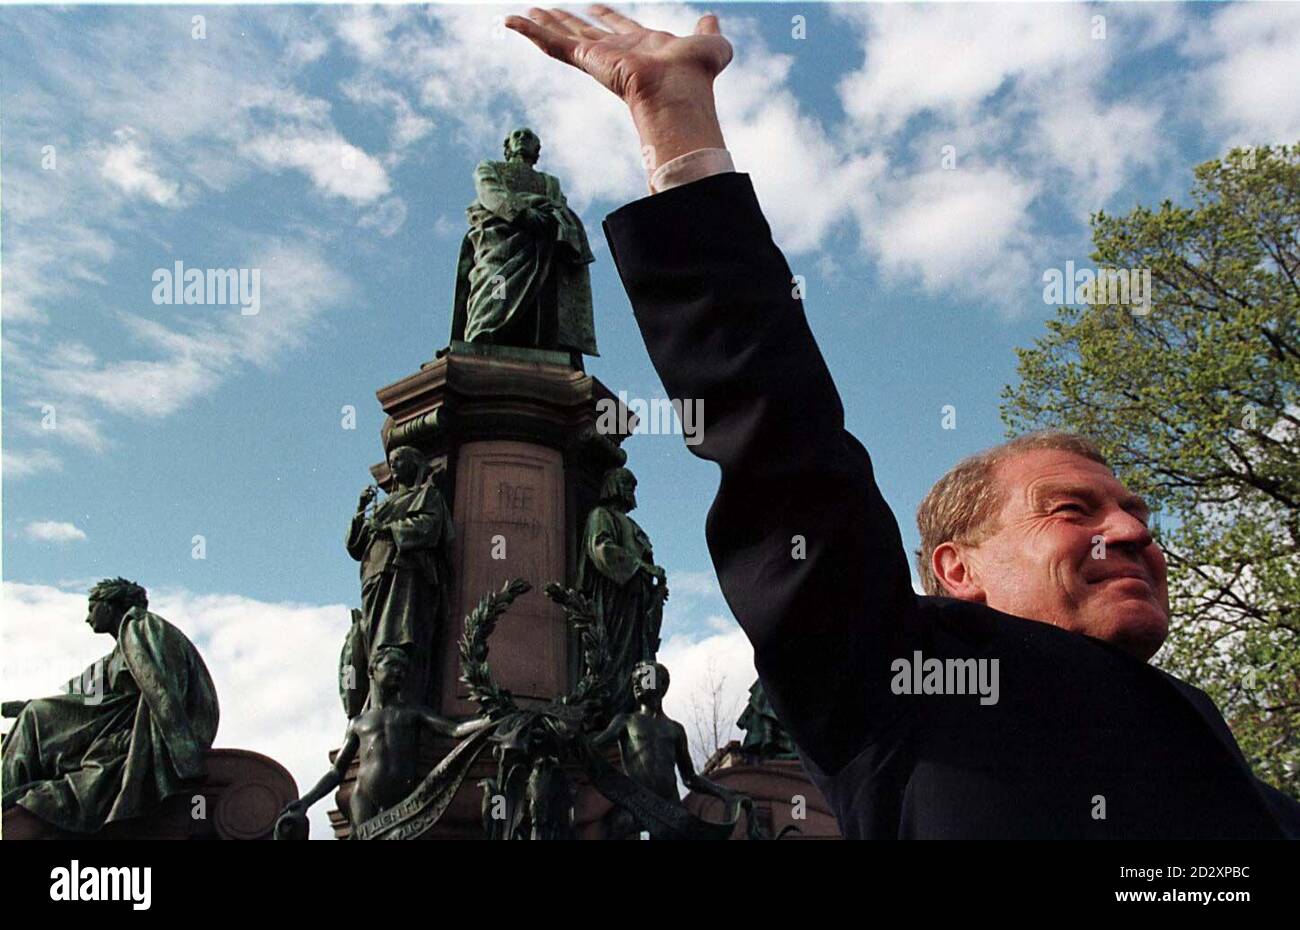 Liberal Democrat leader Paddy Ashdown addresses a rally in Edinburgh this afternoon (Thursday) infront of a memorial to former British Prime Minister William Gladstone. His party launched into the last week of the campaign declaring confidence that they were poised to do better on May 1 than any time since the last war. Photo by Louisa Buller/PA. SEE PA STORY ELECTION Liberals. Stock Photo